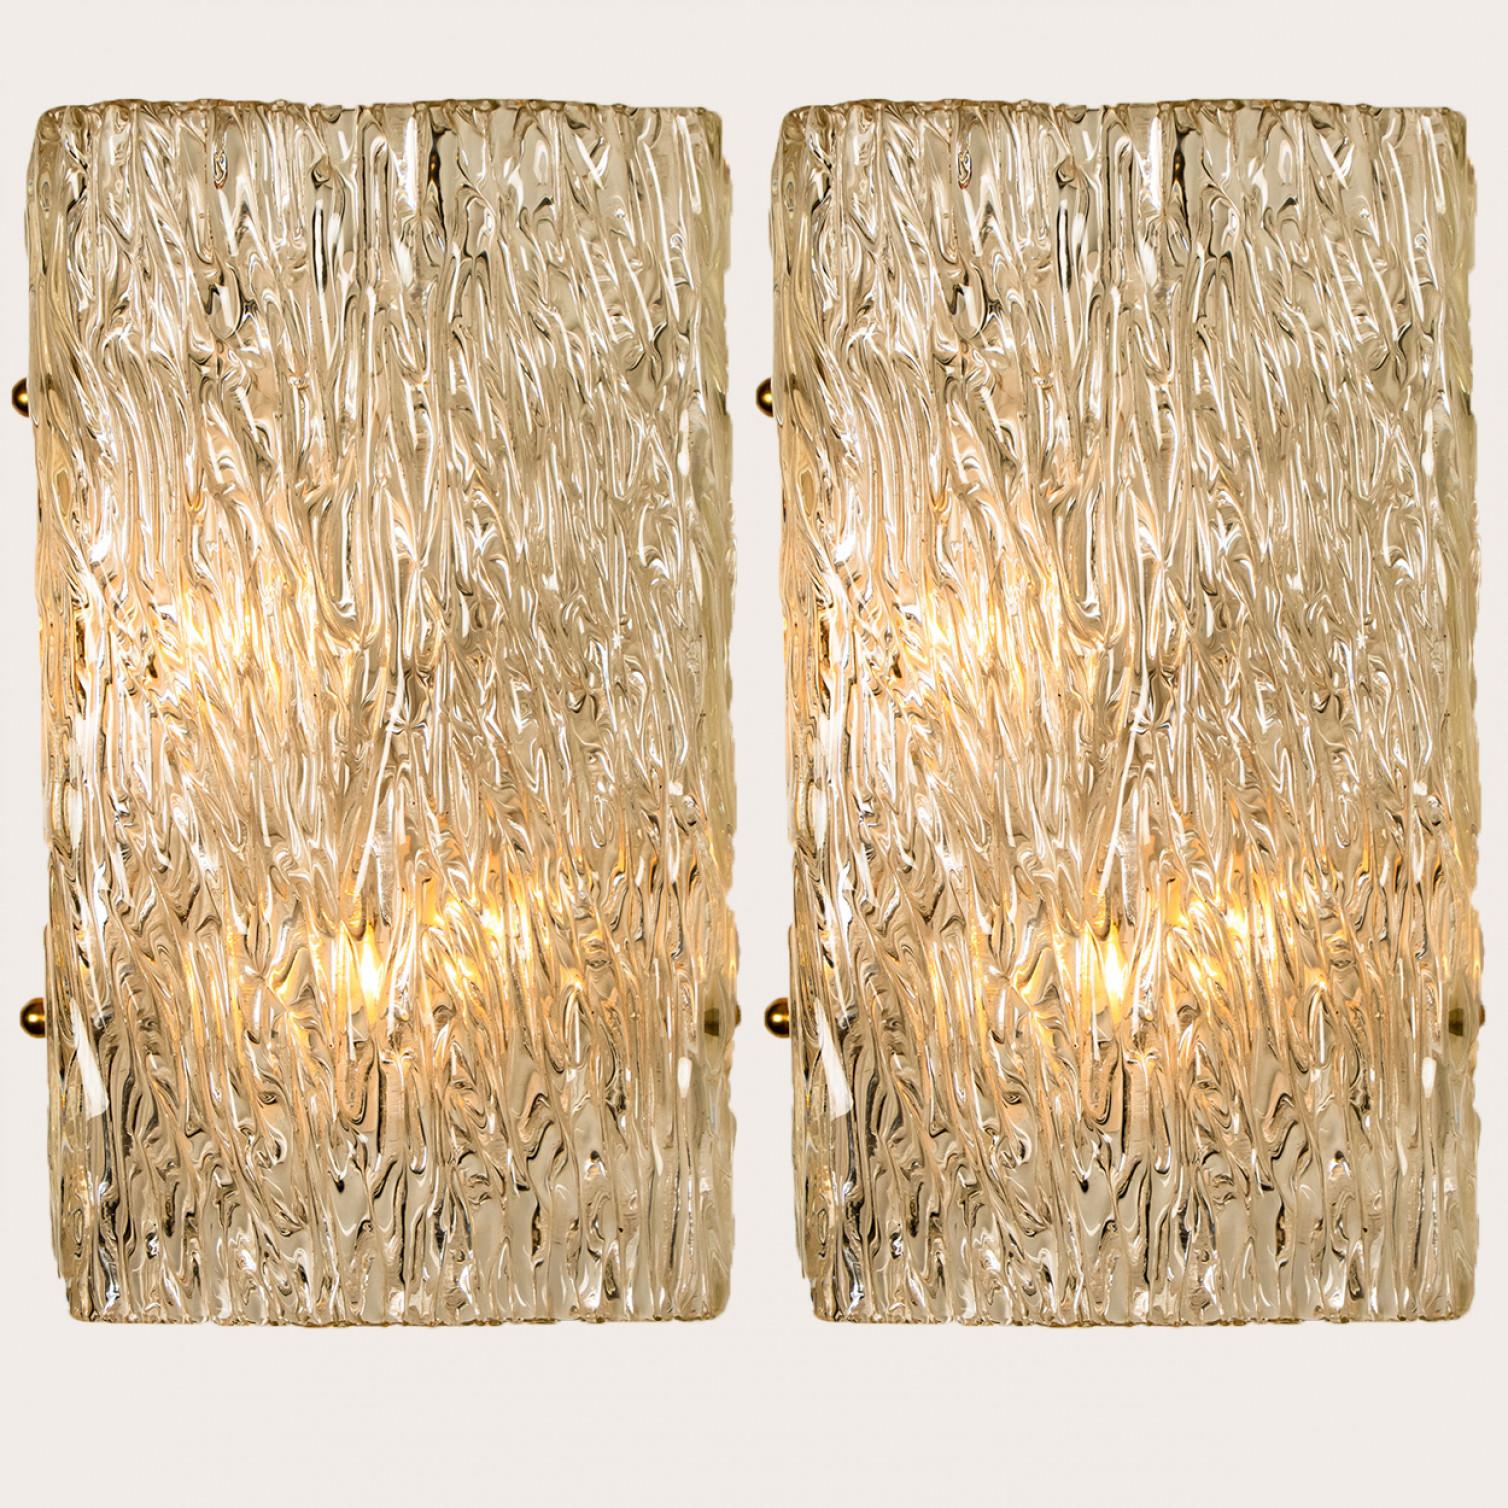 Beautiful high quality light fixture made by Kalmar, Austria. Manufactured in mid century, circa 1970 (at the end of 1960s and beginning of 1970s).

This wall light features lights made of handmade wave textured glass and white back plate. The sides